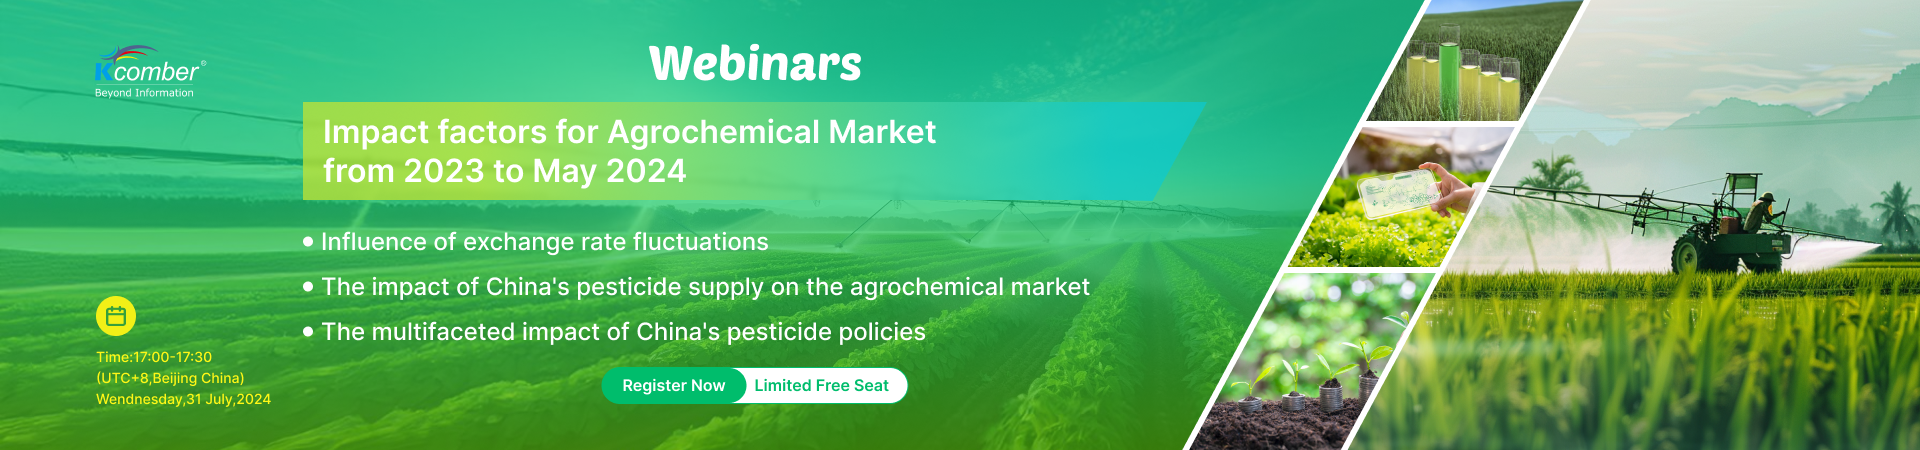 Impact factors for Agrochemical Market from 2023 to May 2024